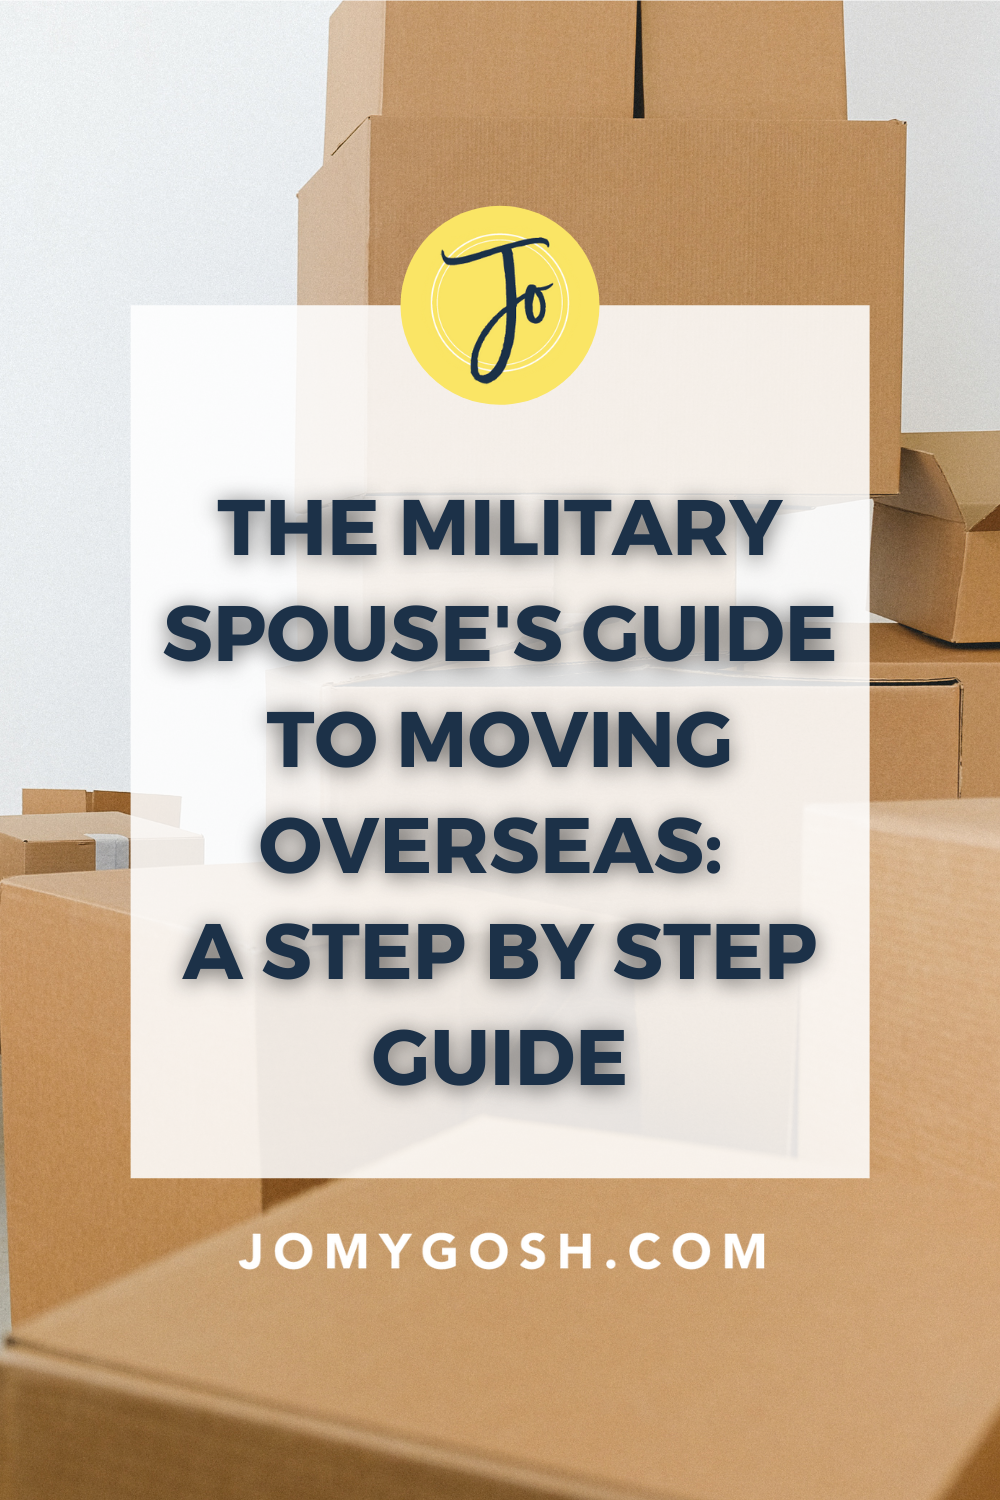 Have OCONUS orders? Start here with our step-by-step guide for moving overseas, written by a military spouse who has been there and done that.